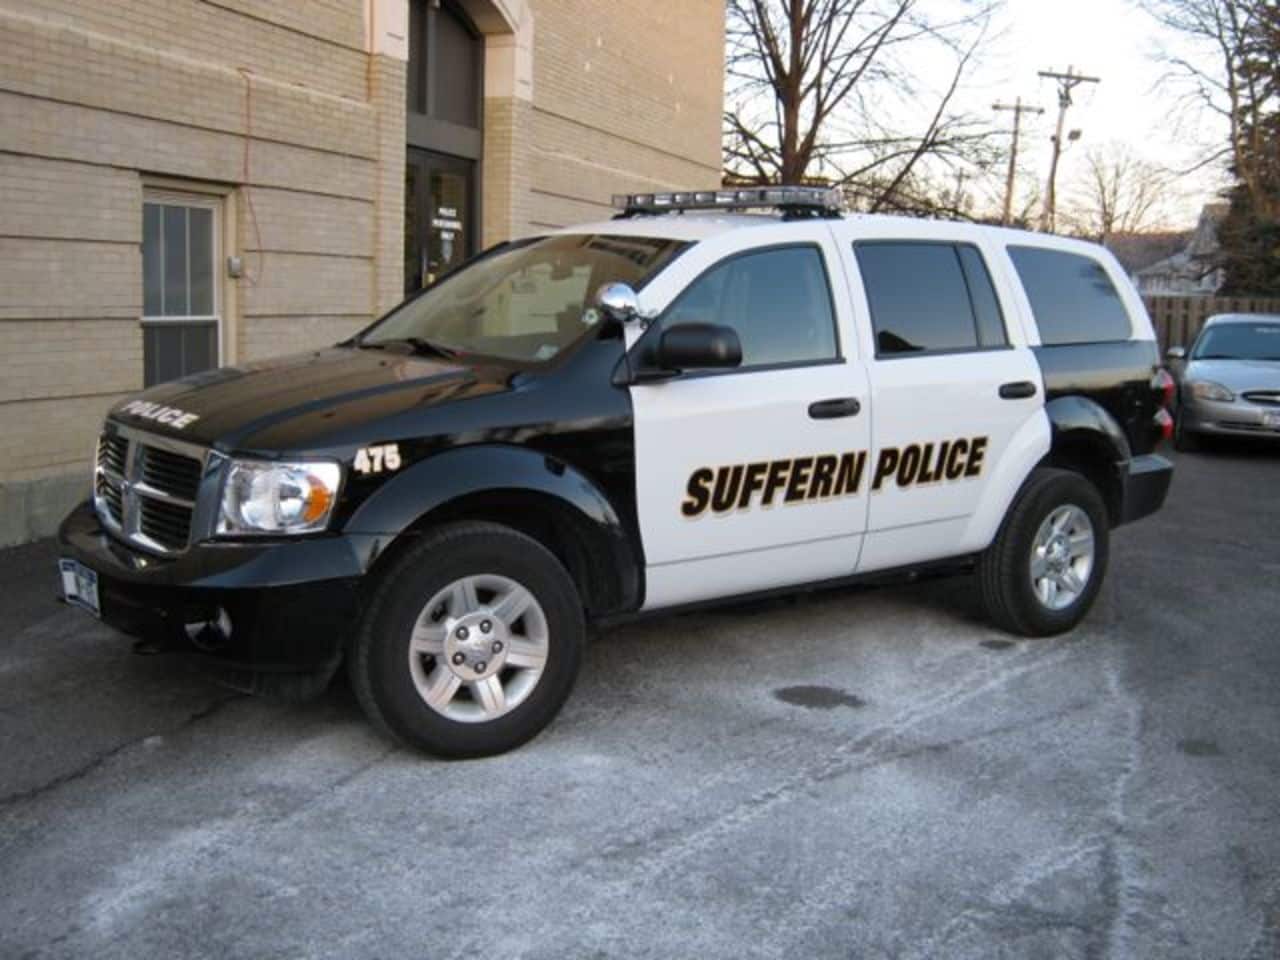 Suffern police say they are focusing on "problem' areas" of the village.